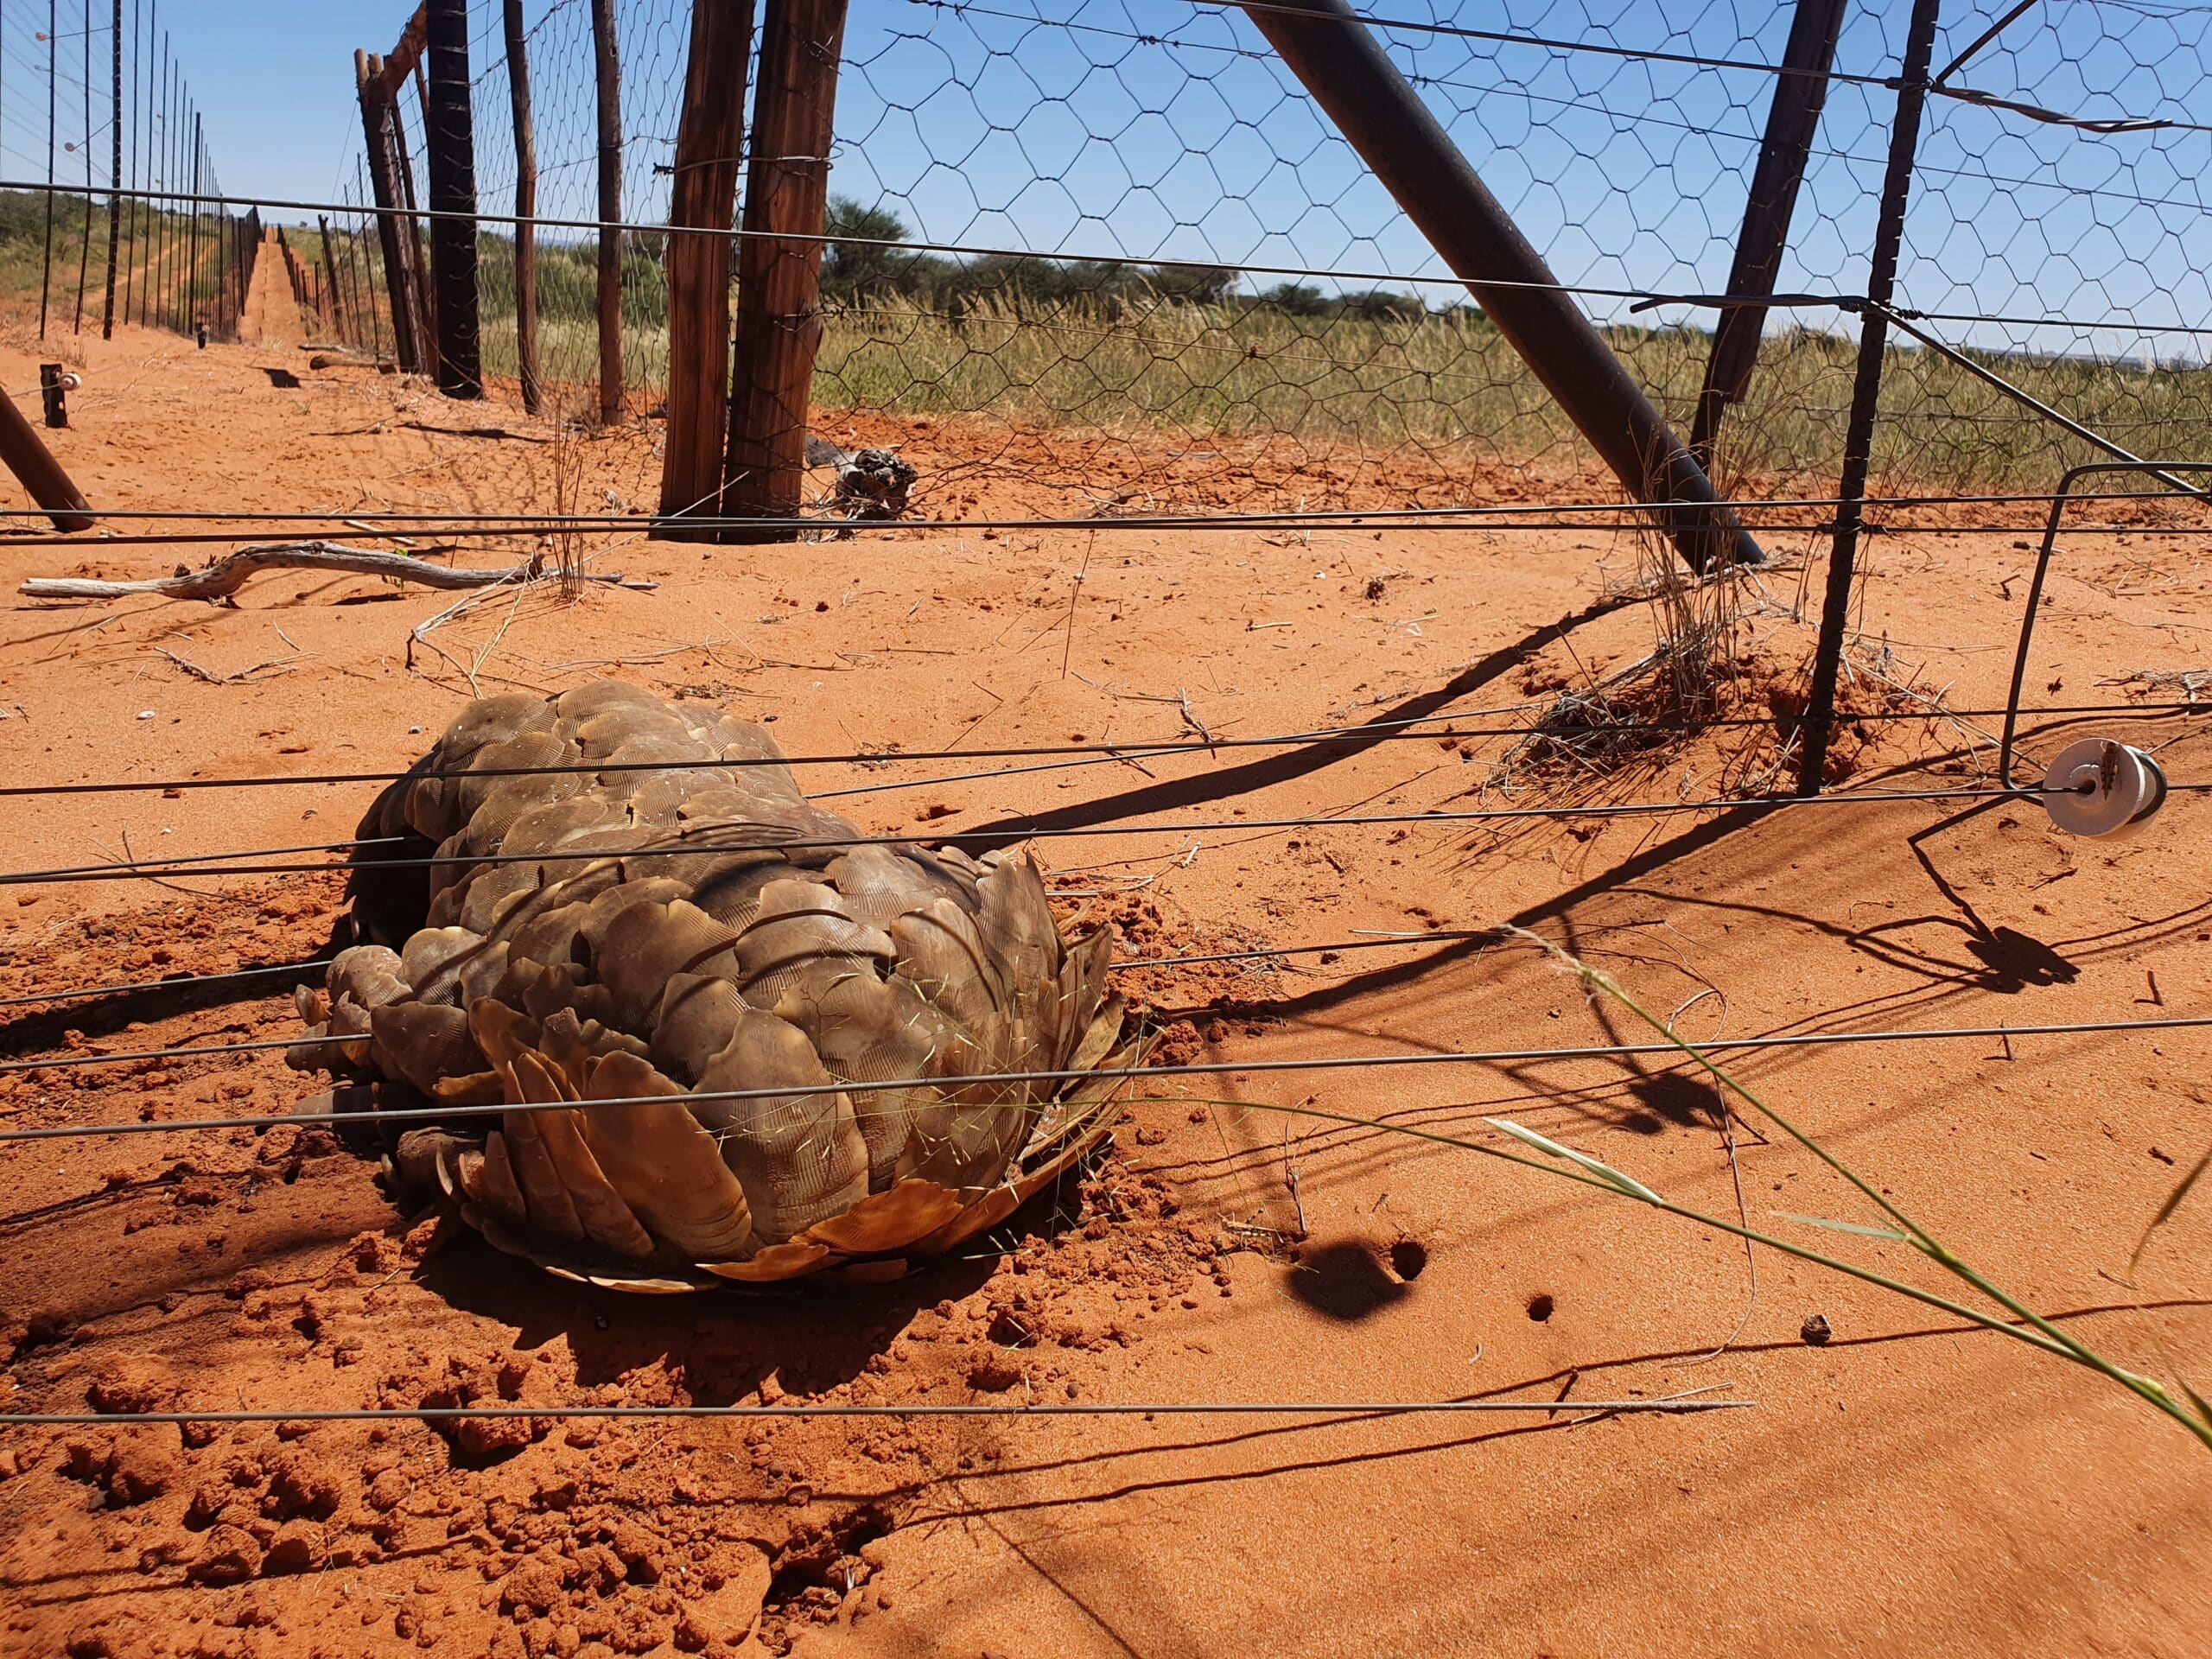 A ground pangolin caught on an electric fence in South Africa